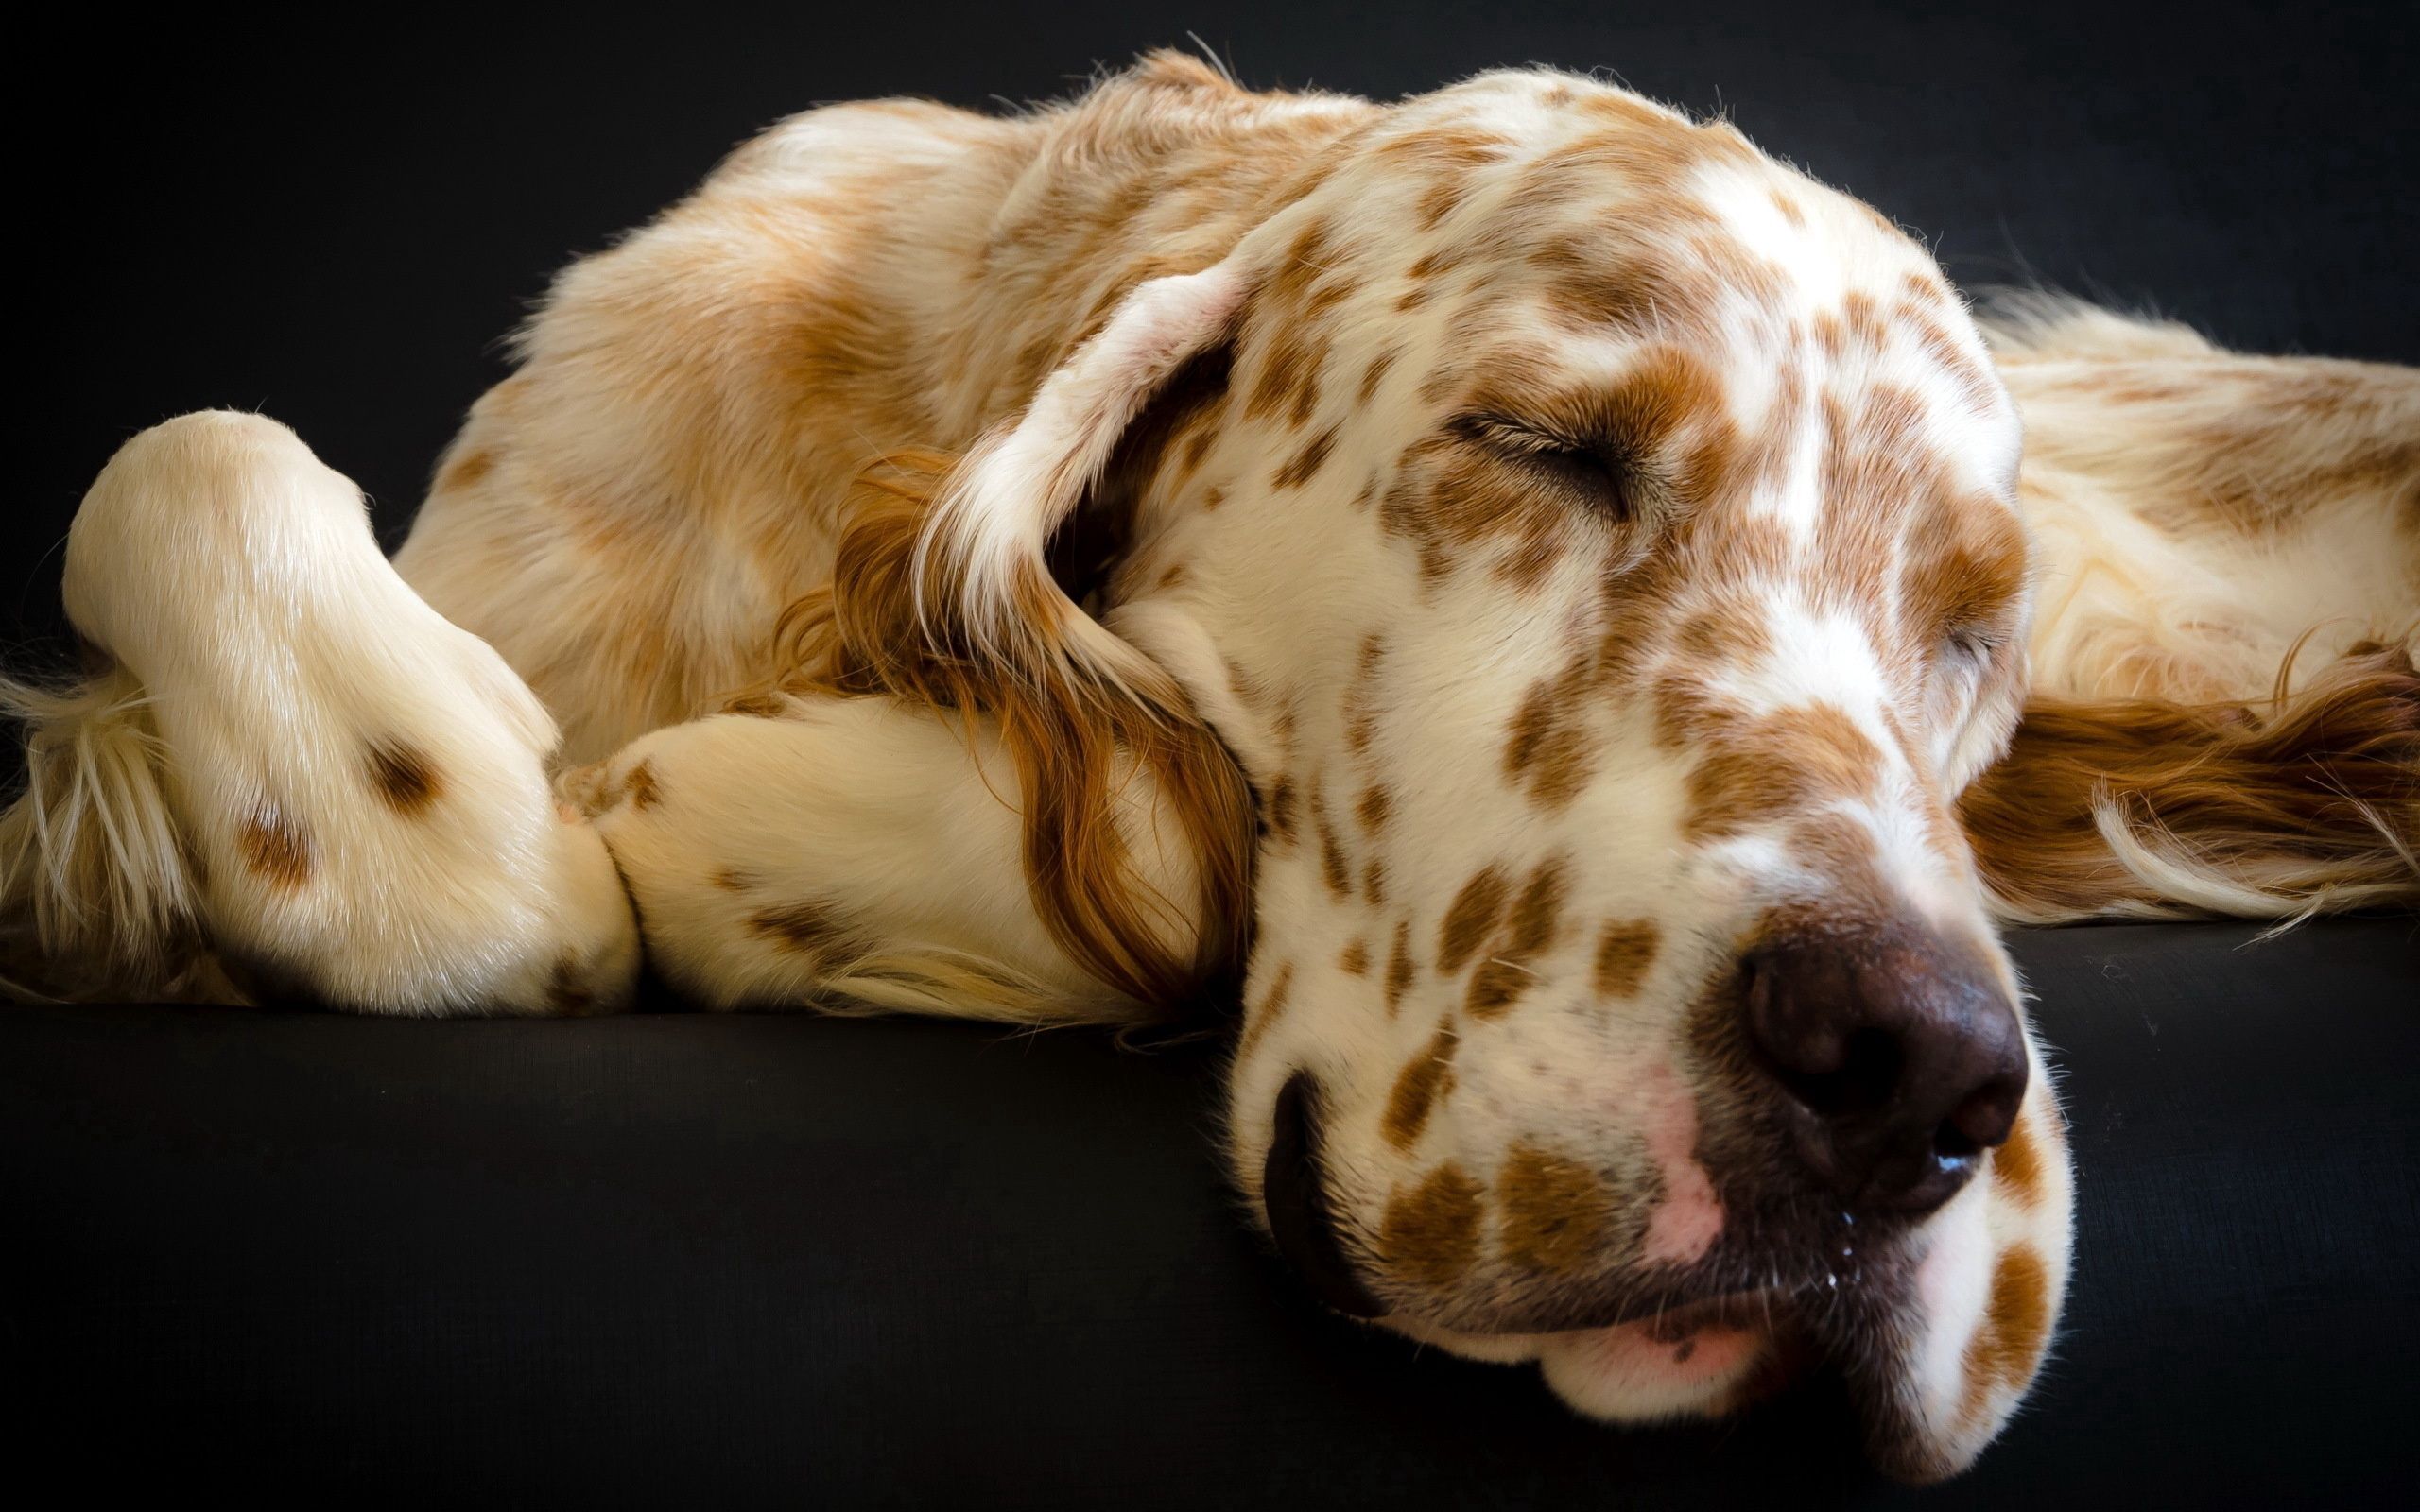 animals, dog, muzzle, spotted, spotty, sleep, dream images